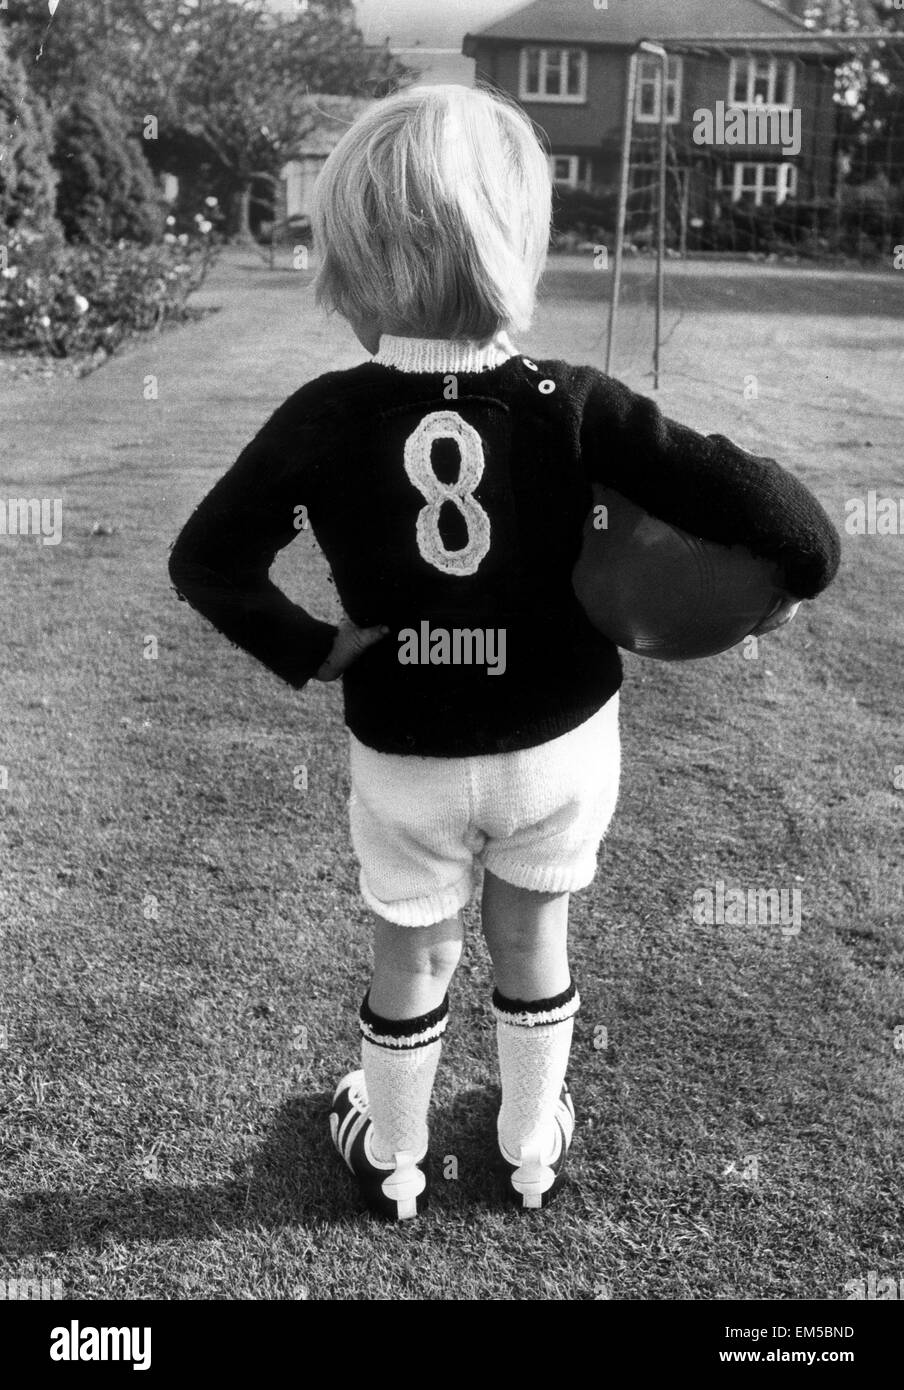 The son of England football international Raich Carter, practicing in the back garden of the family home, wearing a number 8 jersey. 25th October 1972. Stock Photo